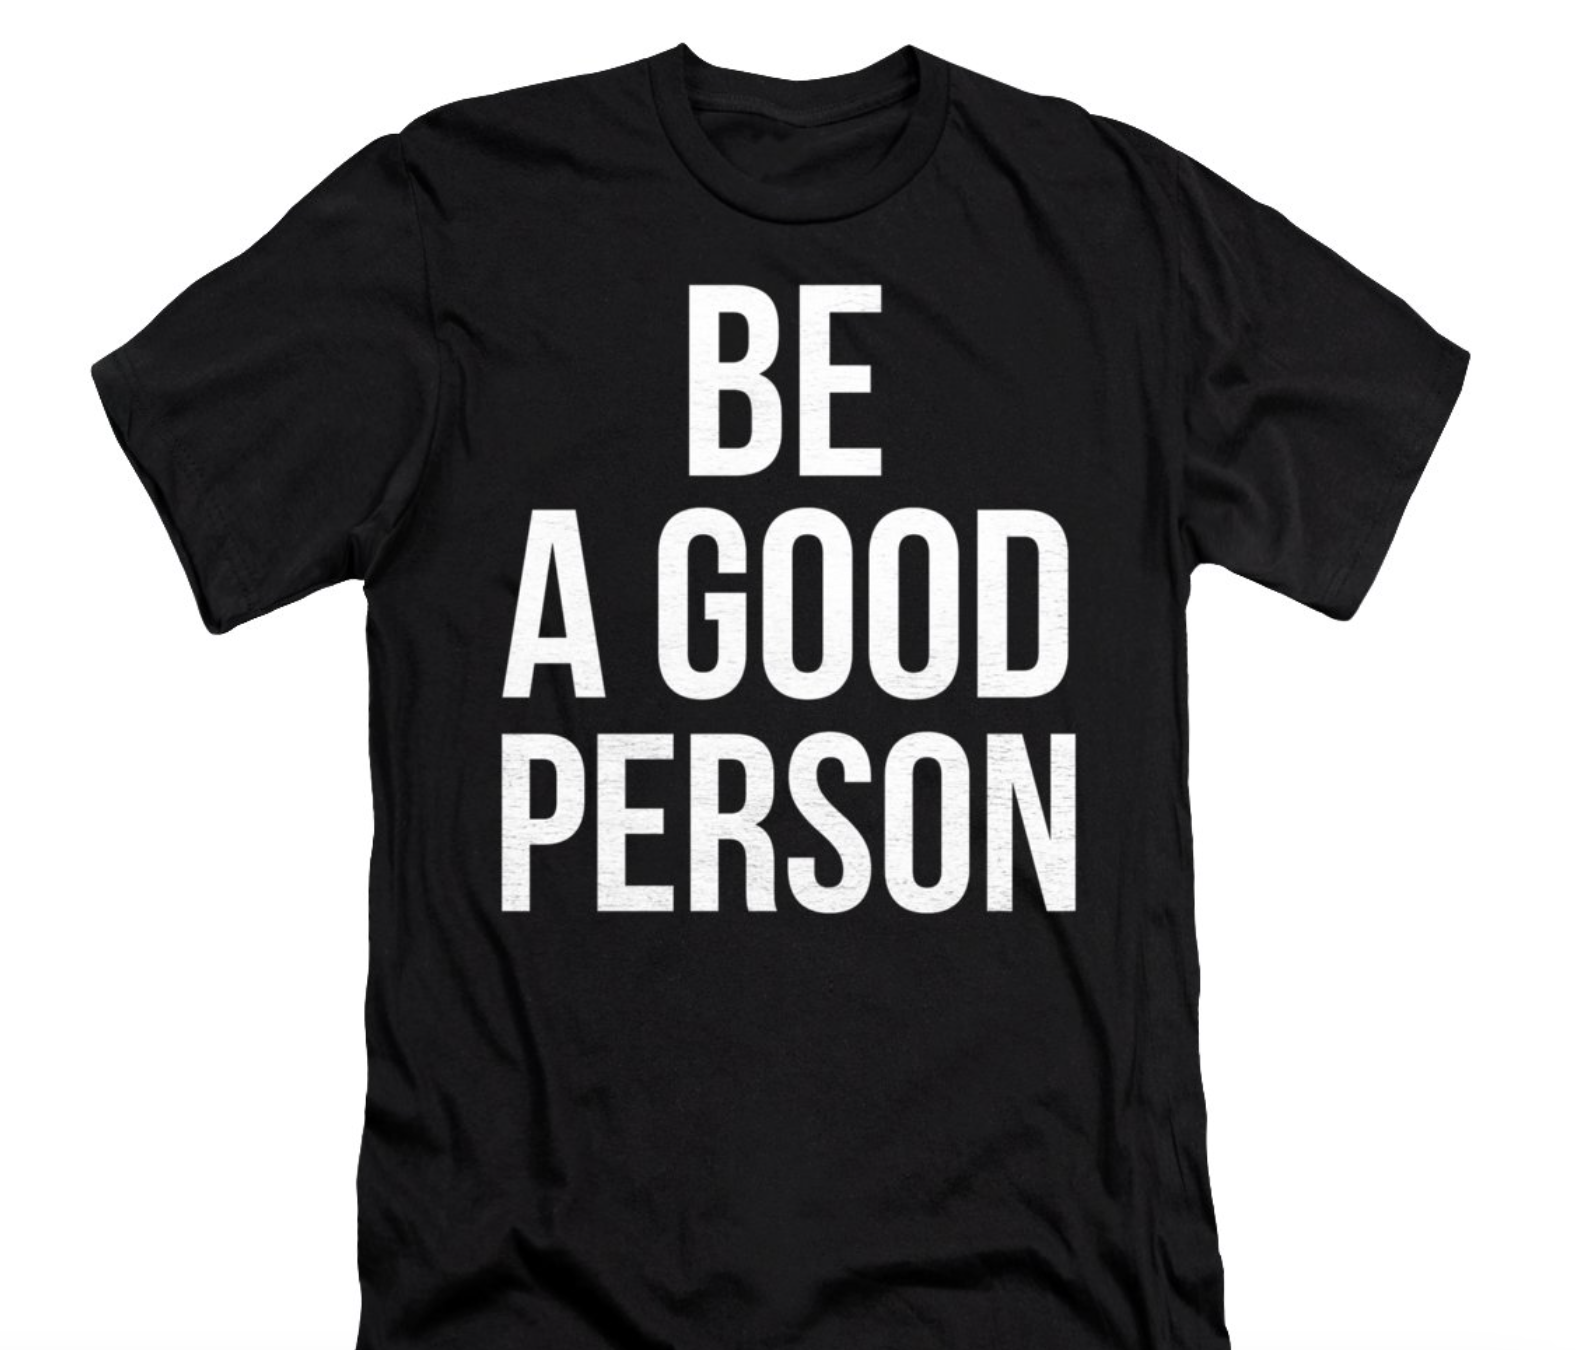 What  it Means to be “A Good Person” in Business